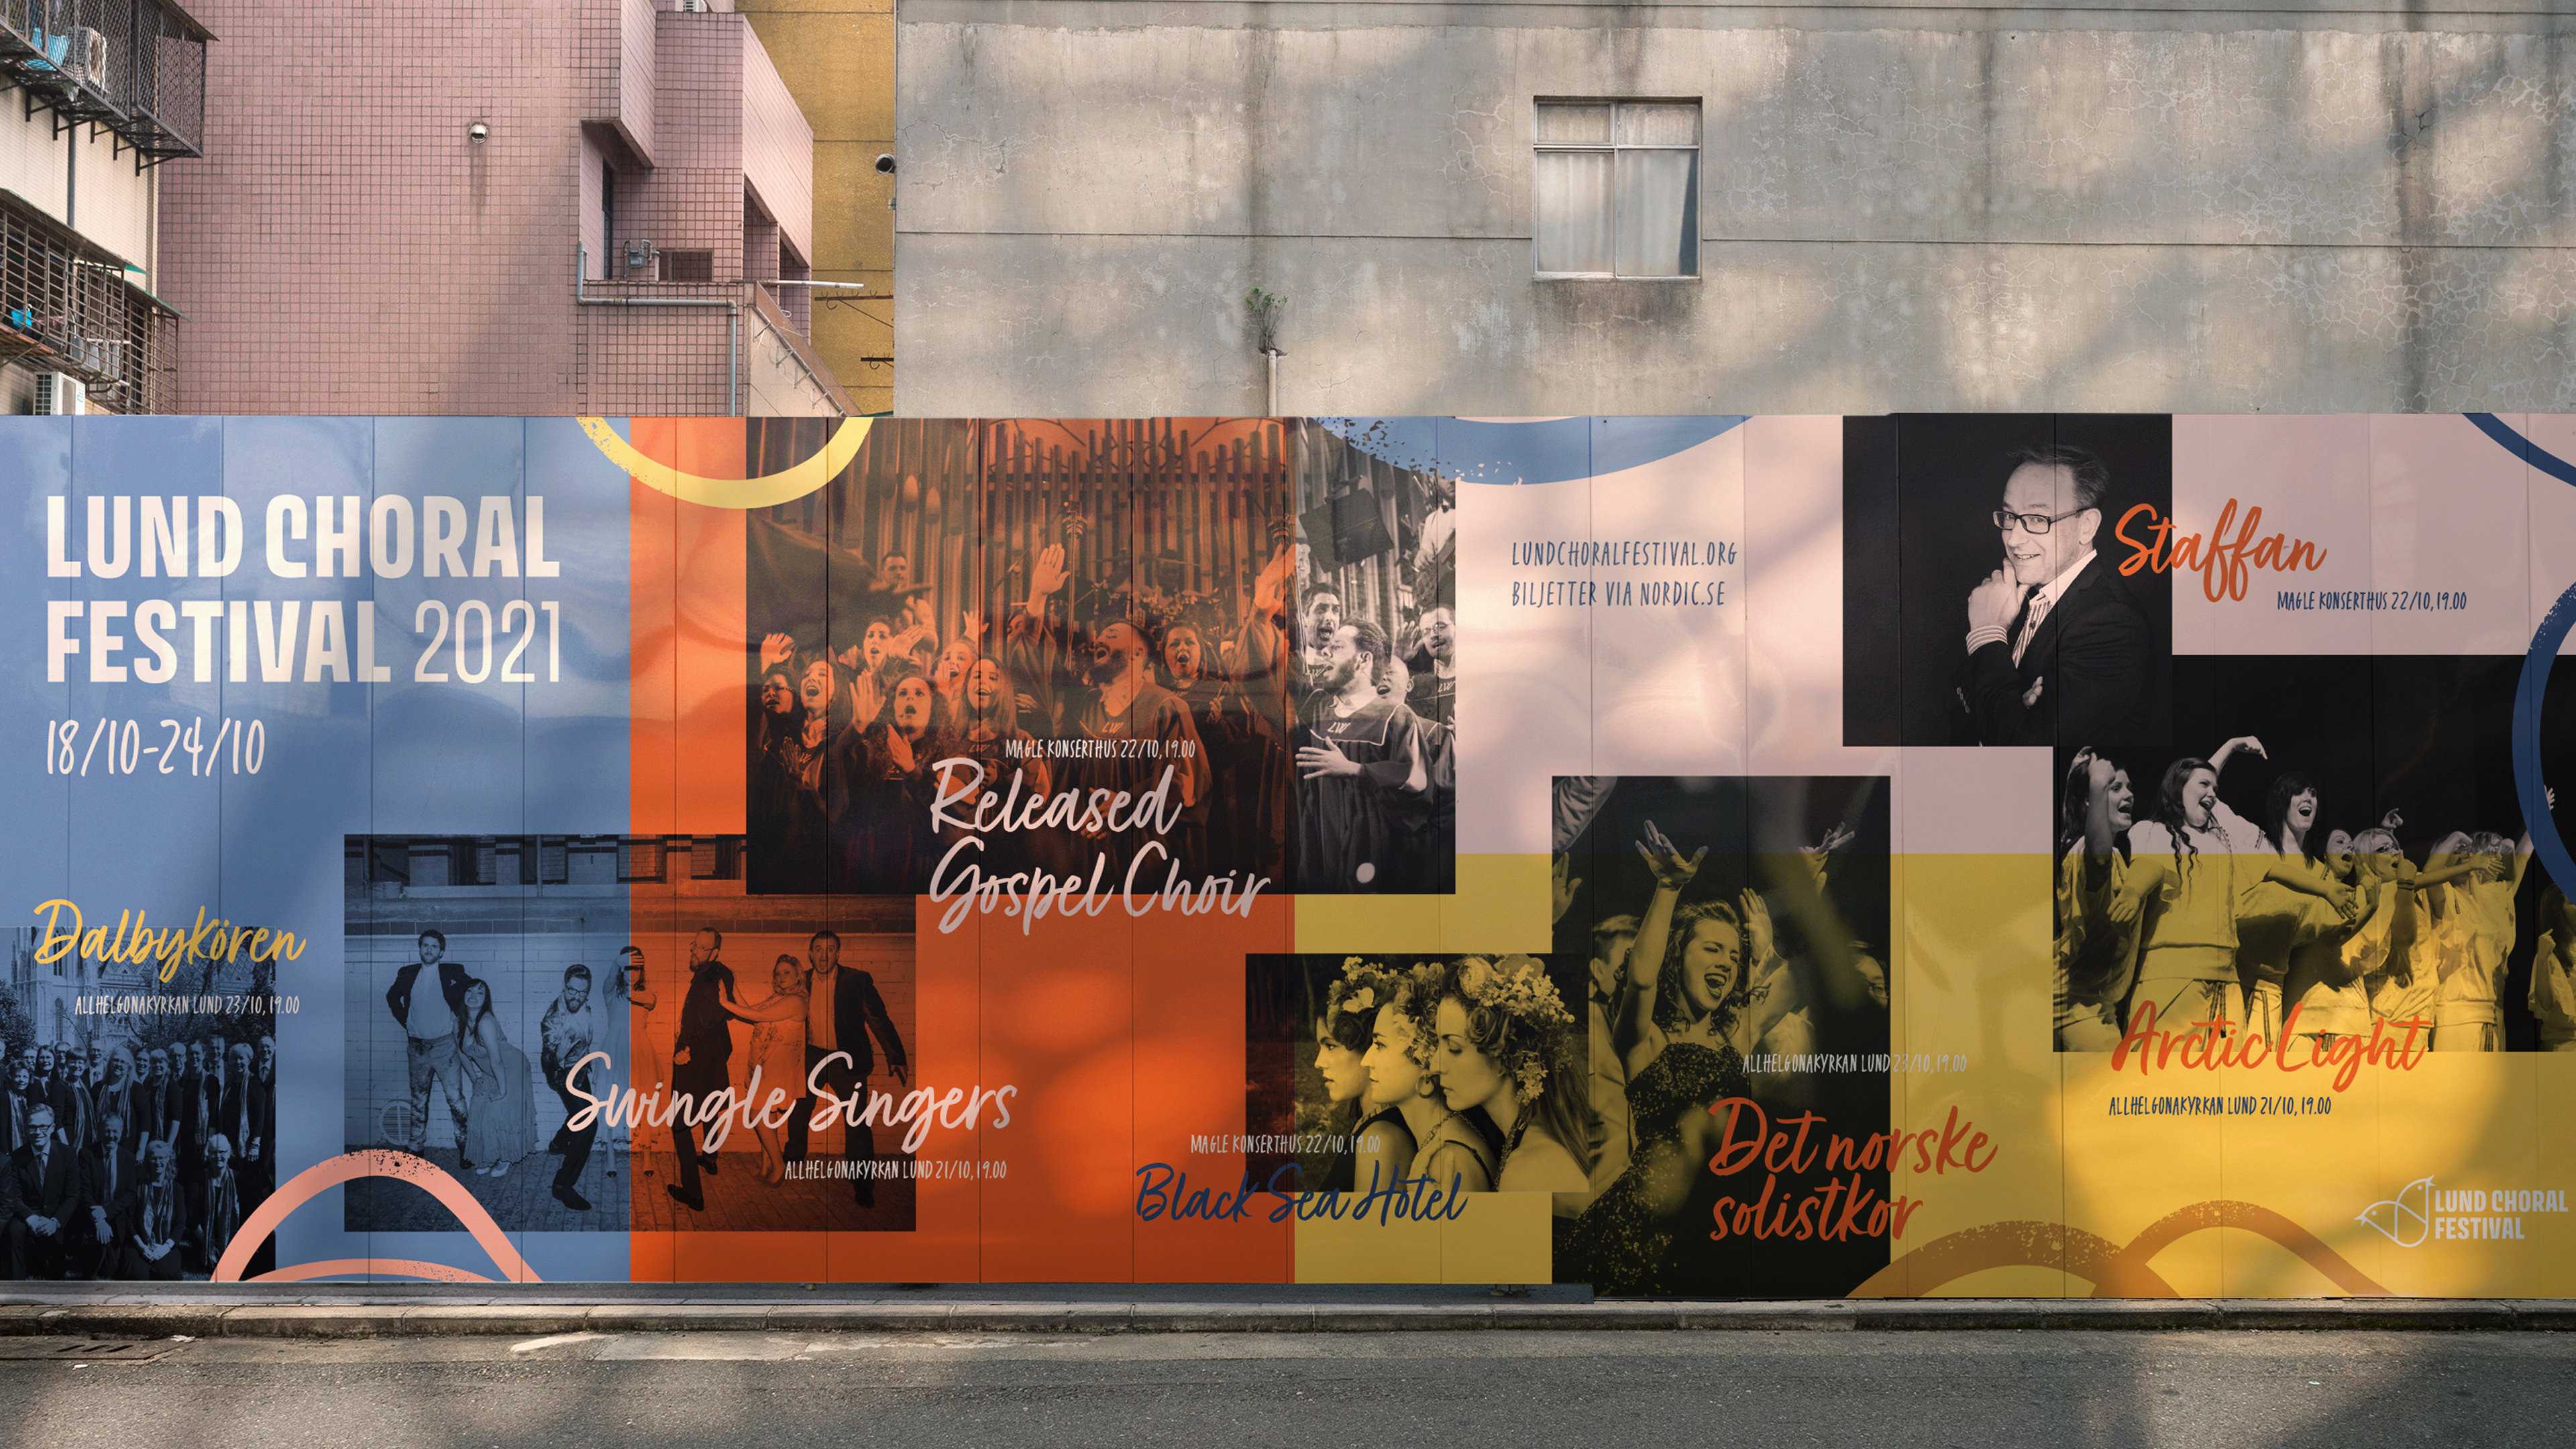 Outdoor wall for Lund choral festival designed by Studio Poi